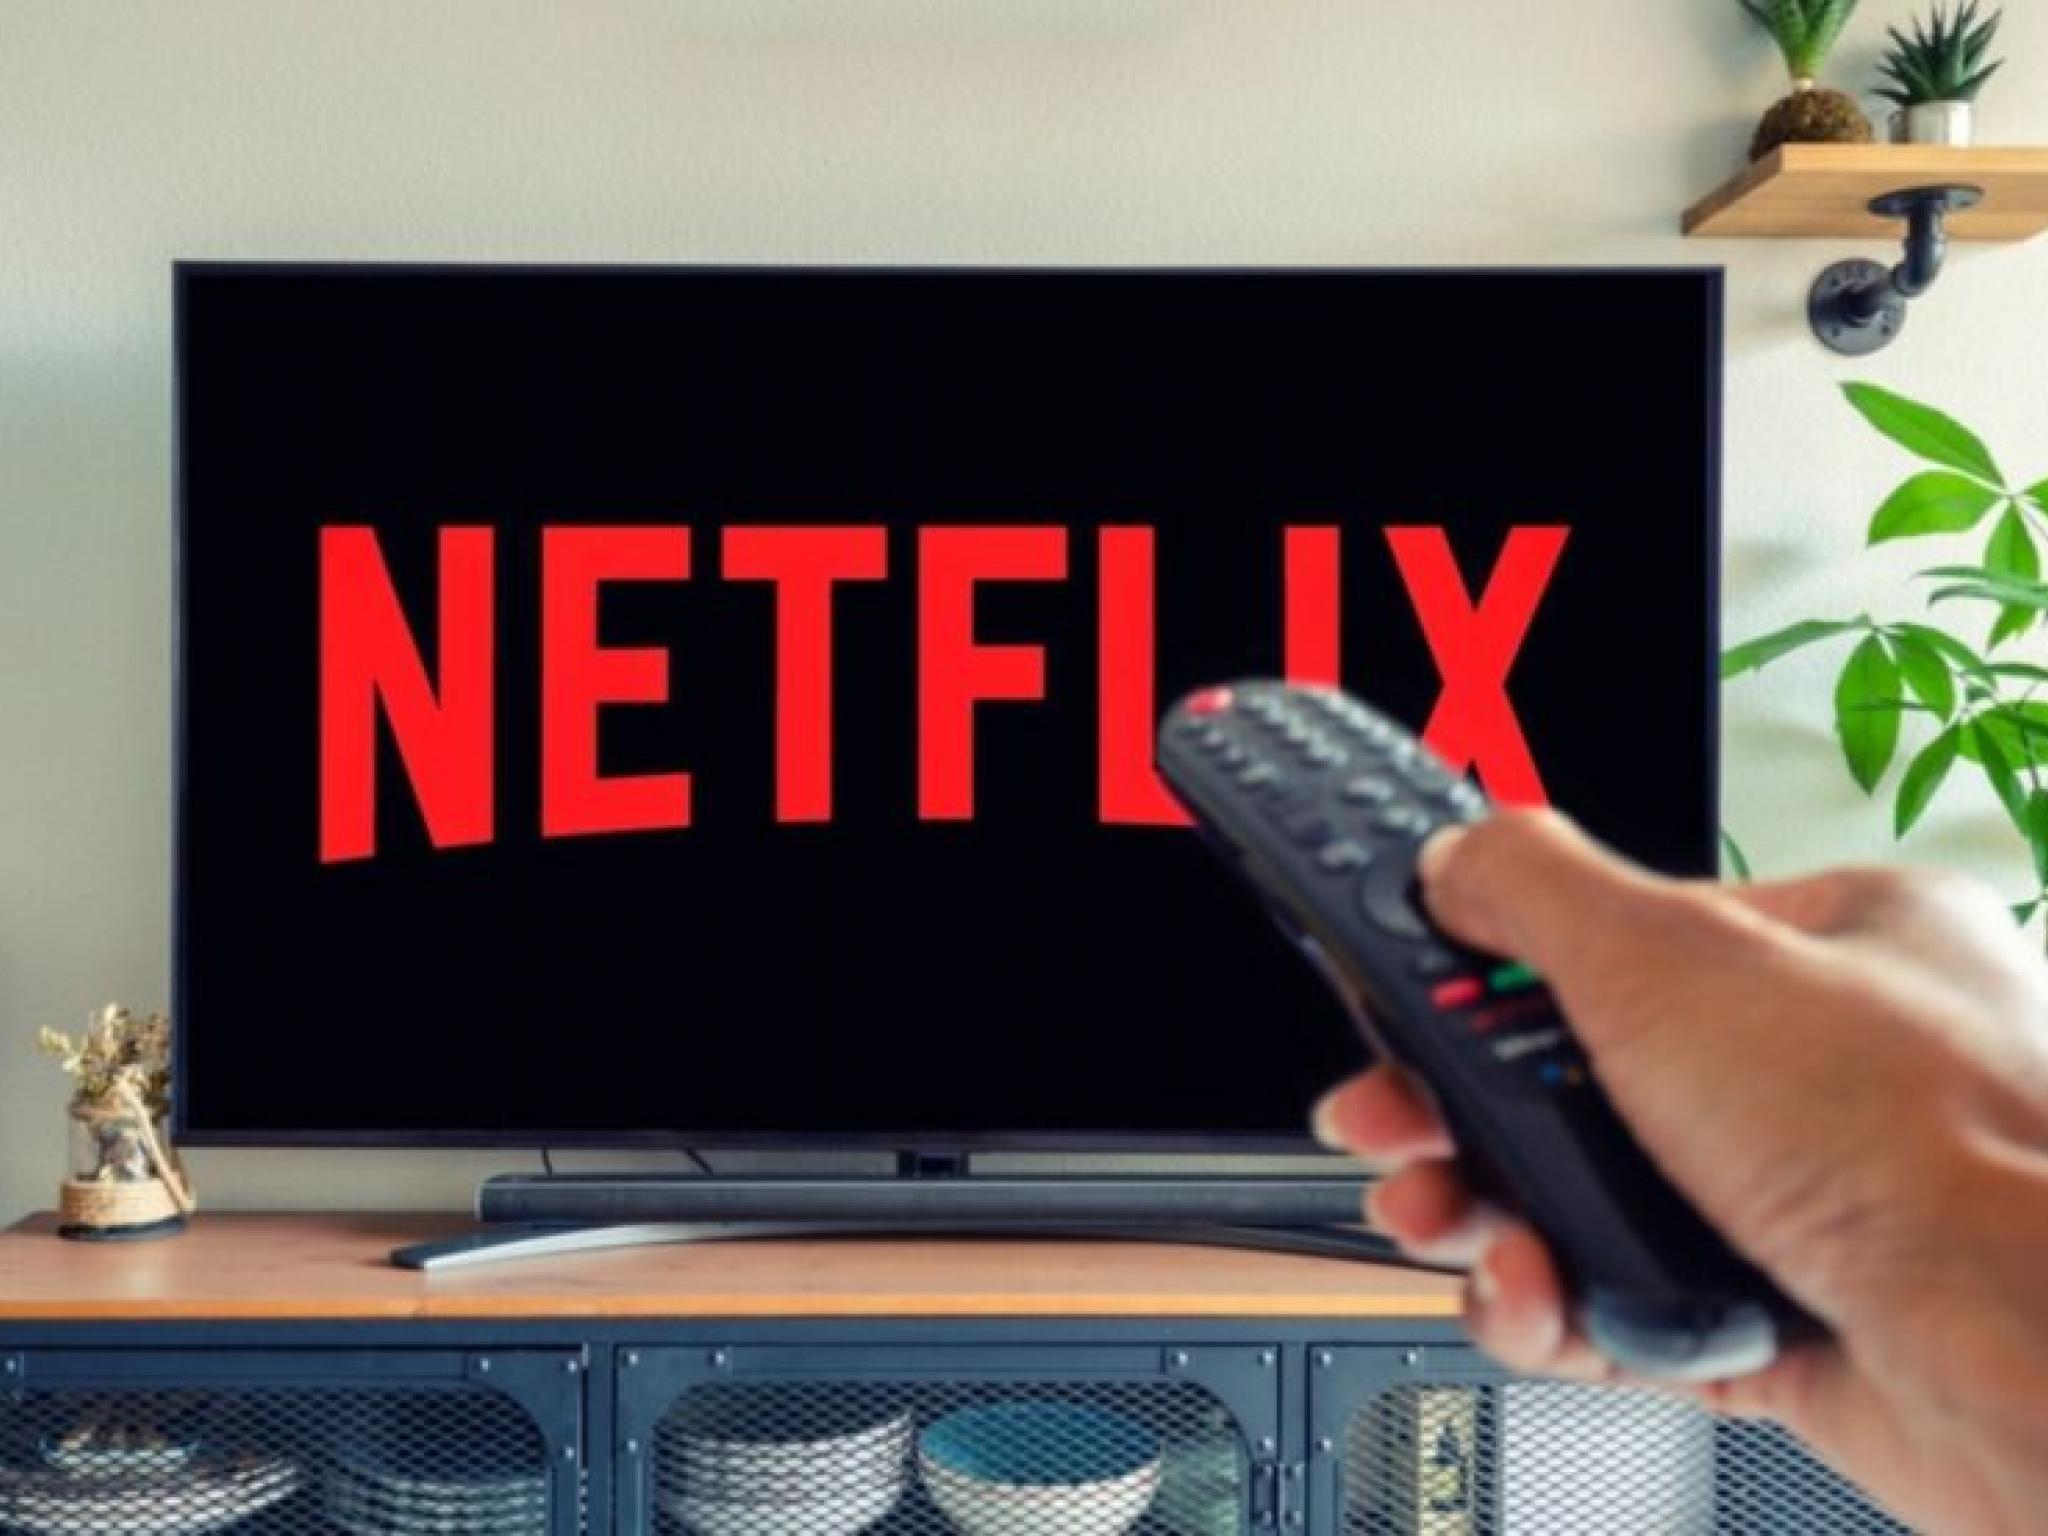  netflix-analyst-calls-streamer-default-choice-for-consumers-due-to-strong-engagement-diversified-content 